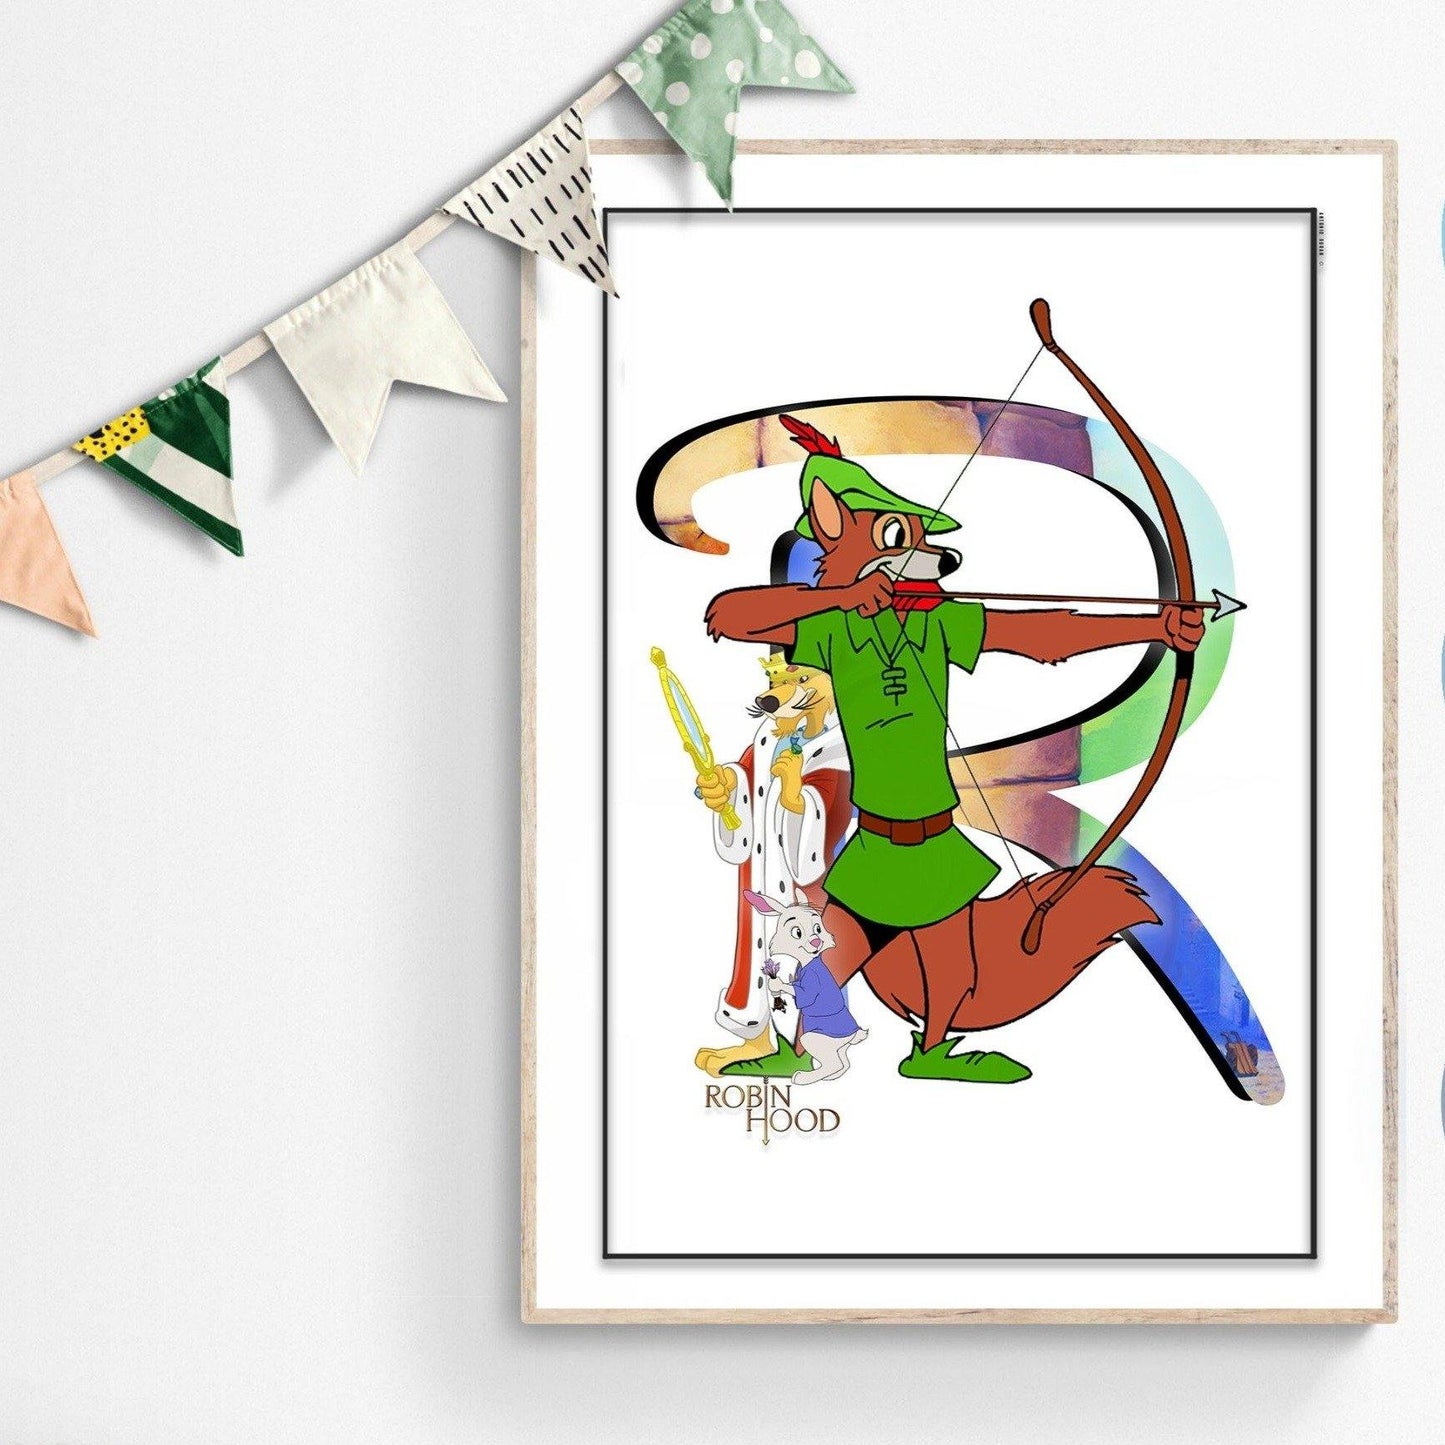 Discover the timeless magic of Disney with this one-of-a-kind Robin Hood movie print! Featuring all your favorite characters from Disney World, it will add a splash of nostalgia to any room. Whether you're a fan of the classics or looking to spruce up your wall art, this unique Disney poster is the perfect way to show off your passion! Let's get lost in the wonder of Disney! - 98types